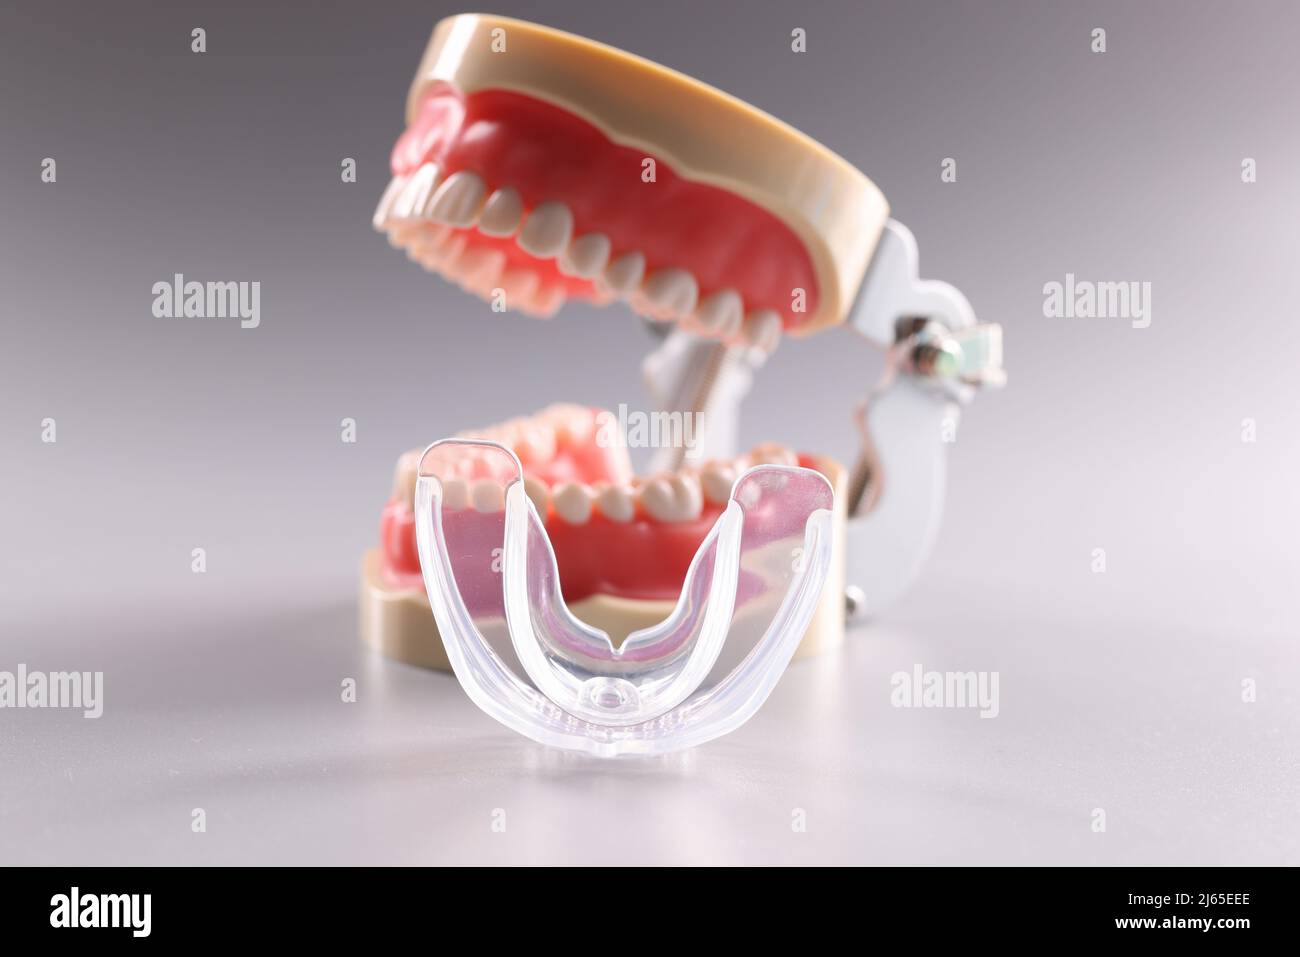 Tooth model and aligner teeth orthodontic dental model or human jaw Stock Photo